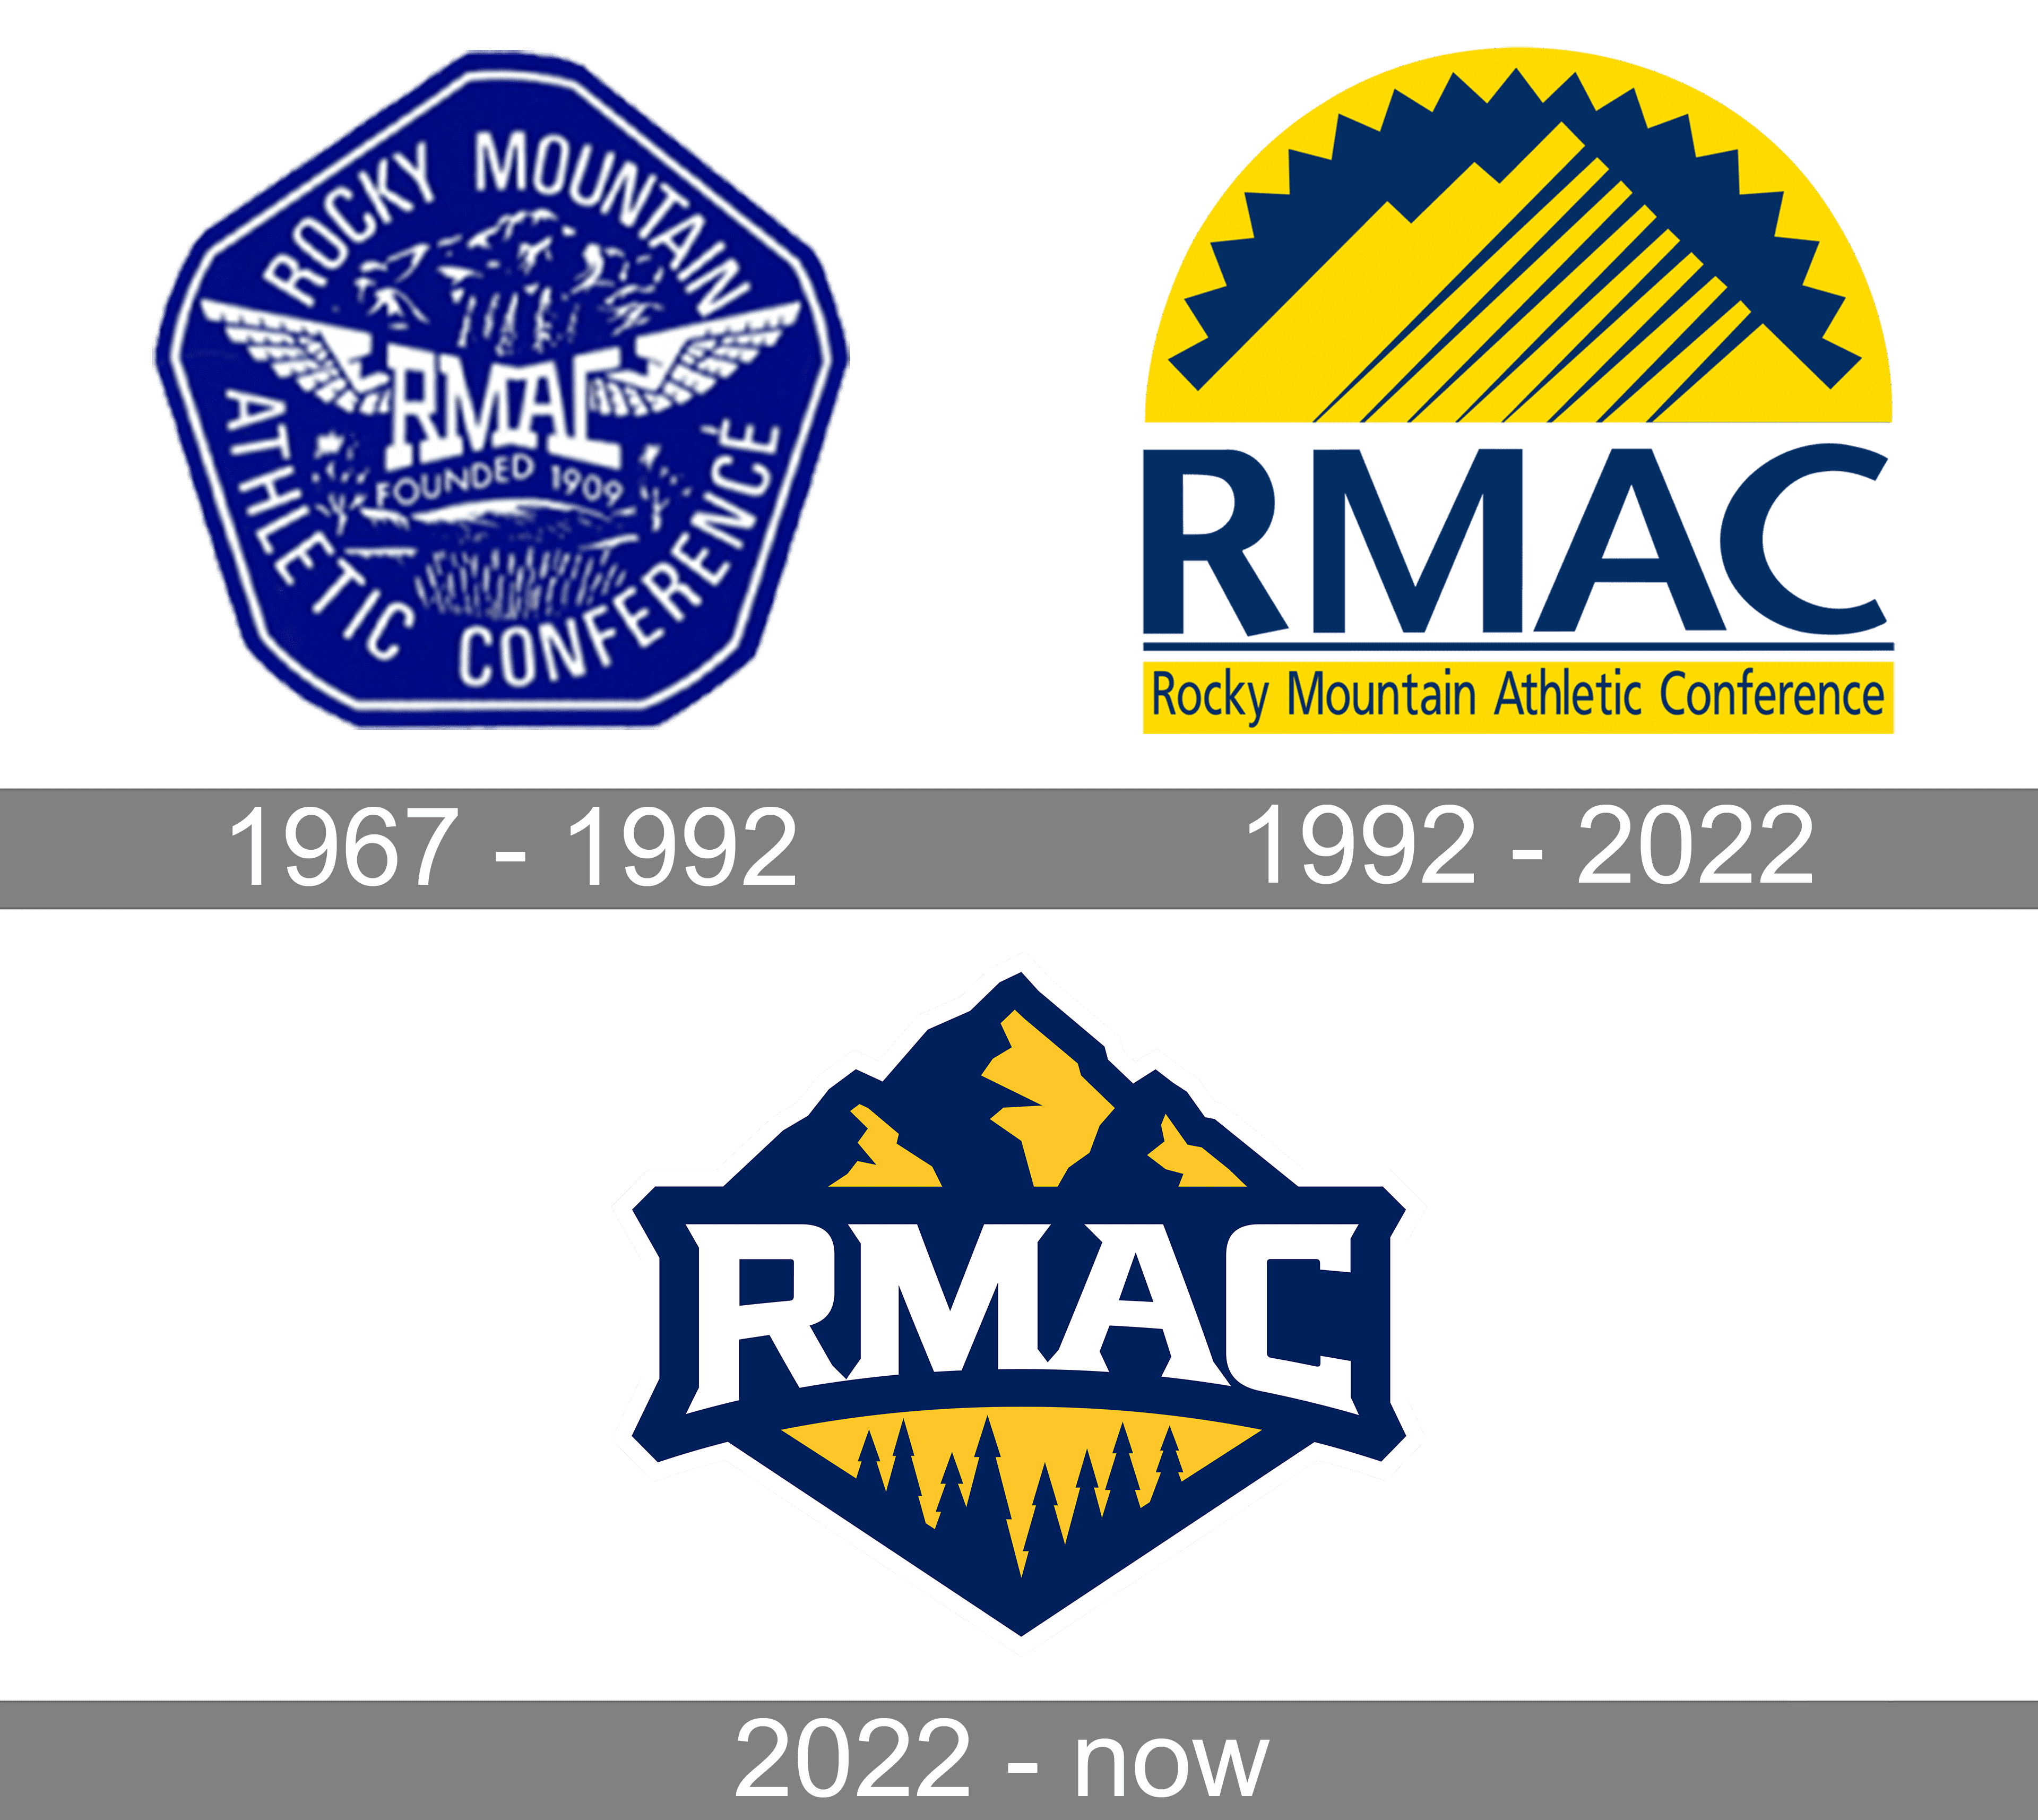 https://1000logos.net/wp-content/uploads/2022/03/Rocky-Mountain-Athletic-Conference-Logo-history.png